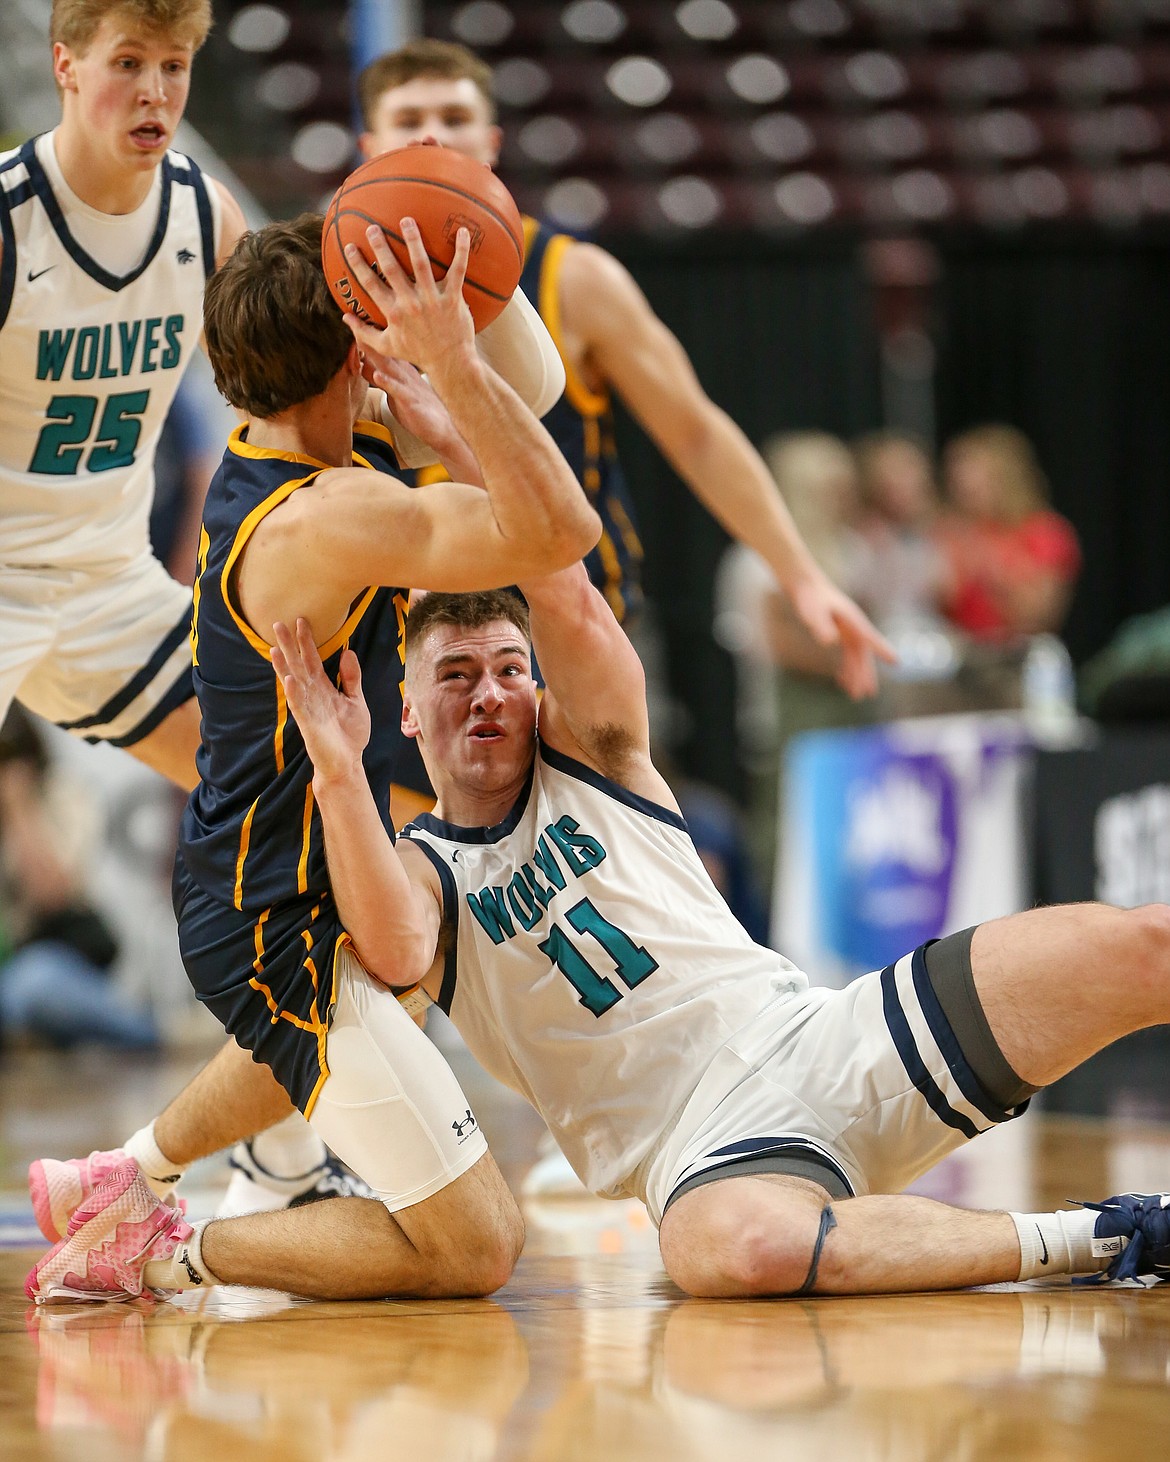 JASON DUCHOW PHOTOGRAPHY
Lake City High senior forward Zach Johnson battles for a loose ball during Saturday's state 5A championship game in Nampa.